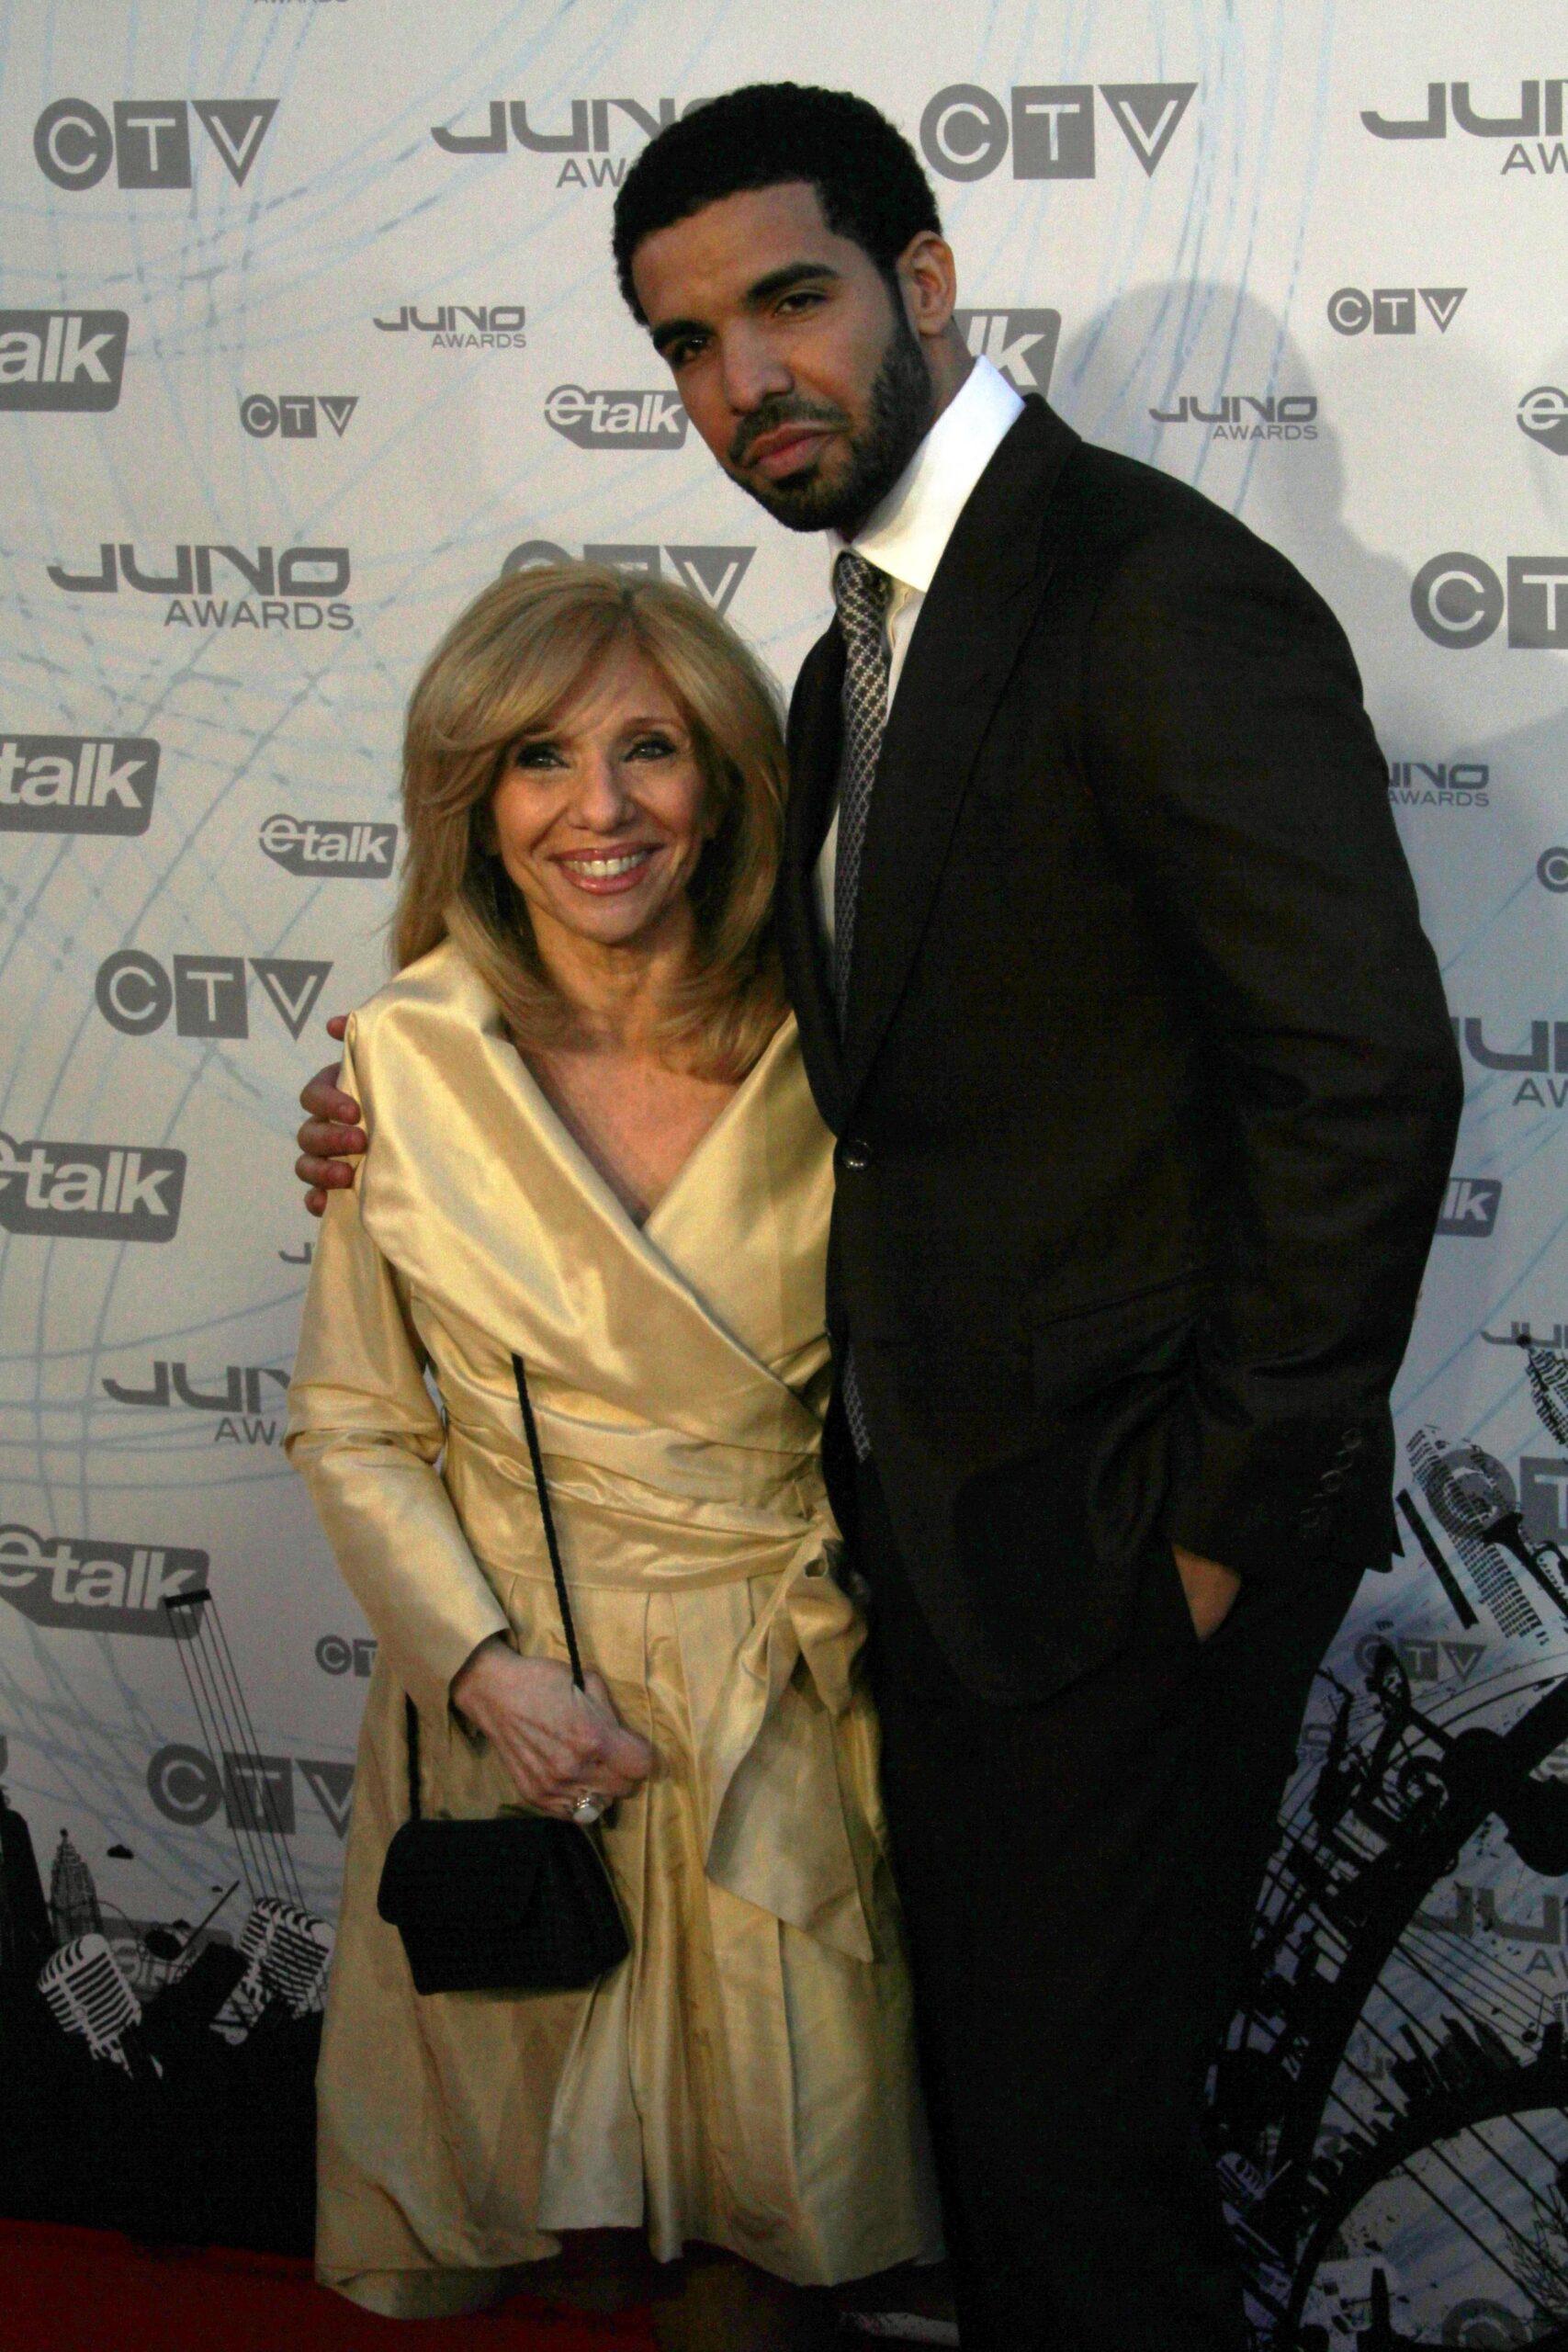 Drake and his Mother arriving on the 2011 Juno Awards Red Carpet at the Air Canada Centre, Toronto, Ontario